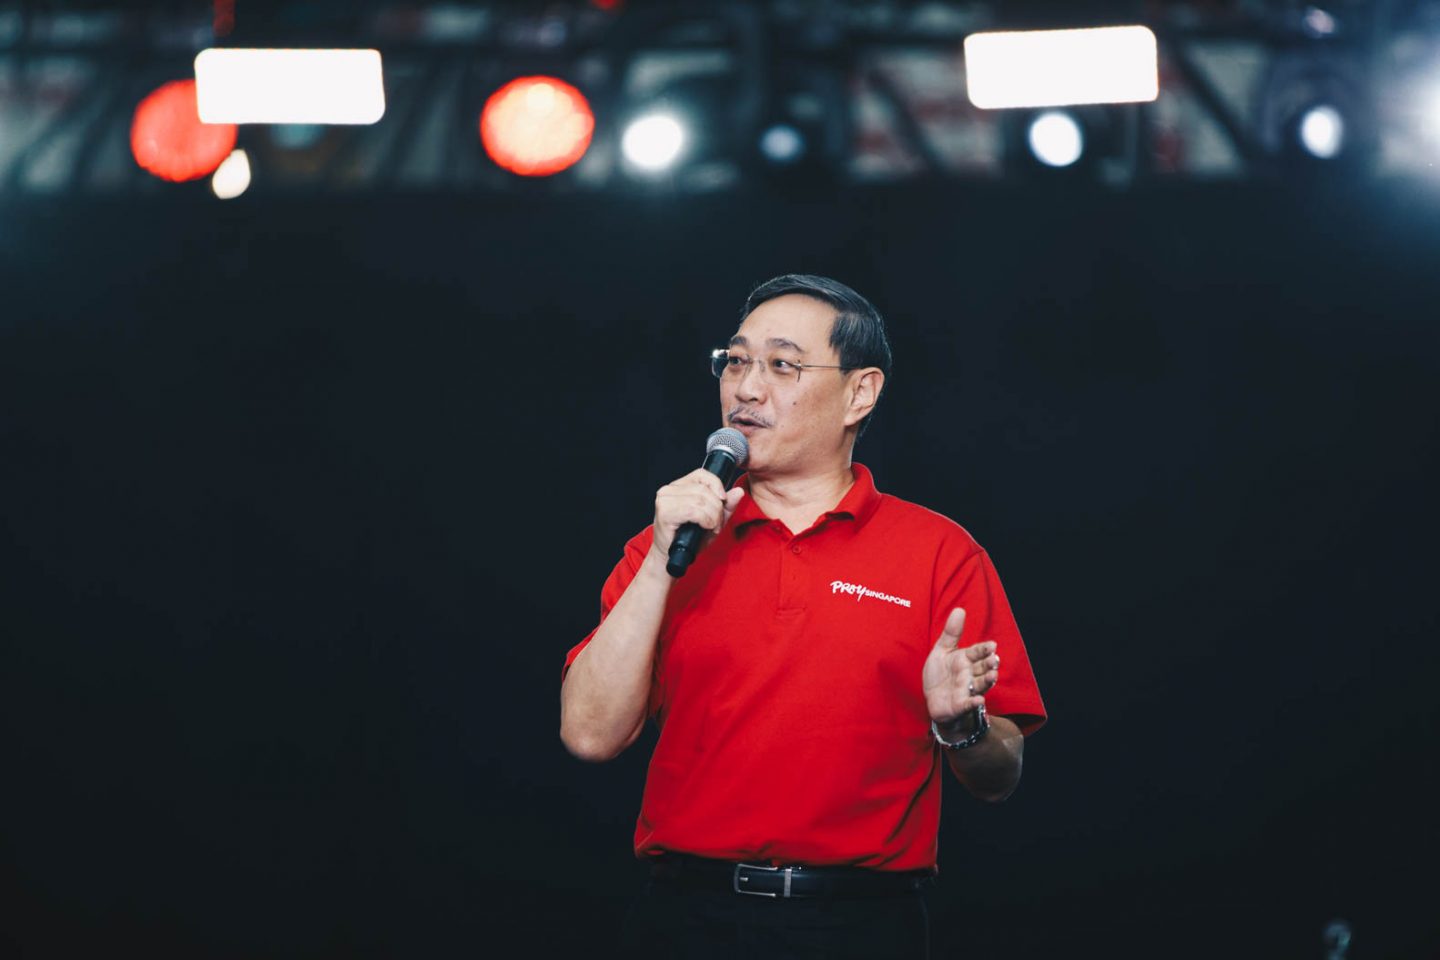 Reverend Edmund Chan delivering his opening address at PraySingapore, exhorting attendees to come before God in holy repentance. Photo by Marcus Chow.